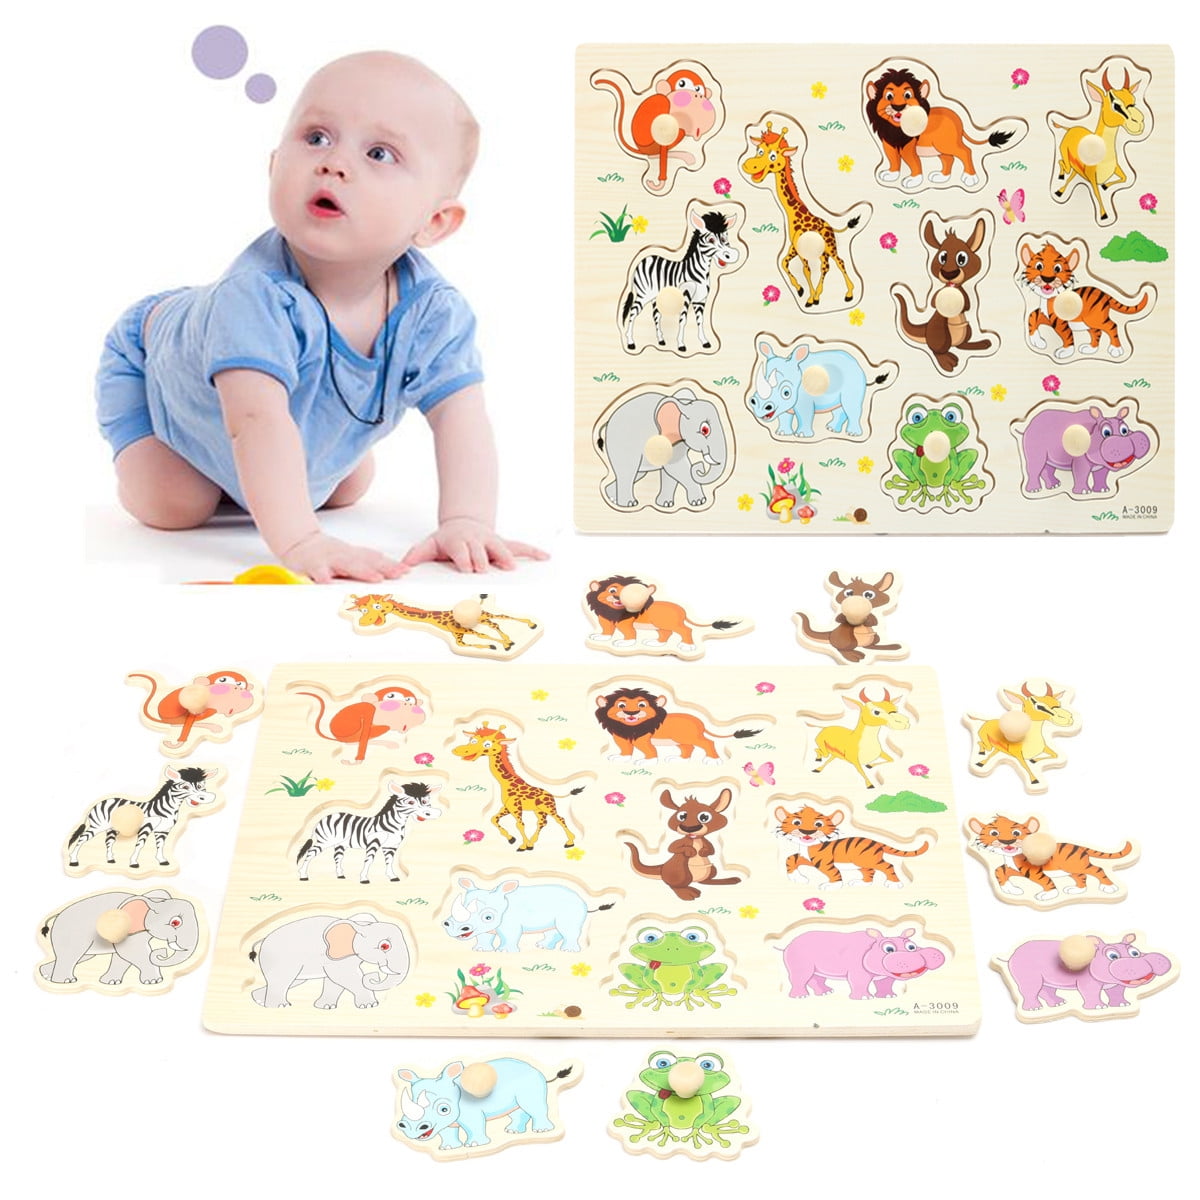 Kids Wooden Matching Zoo Animals Jigsaw Puzzles Toys Gifts for Toddlers Shan 